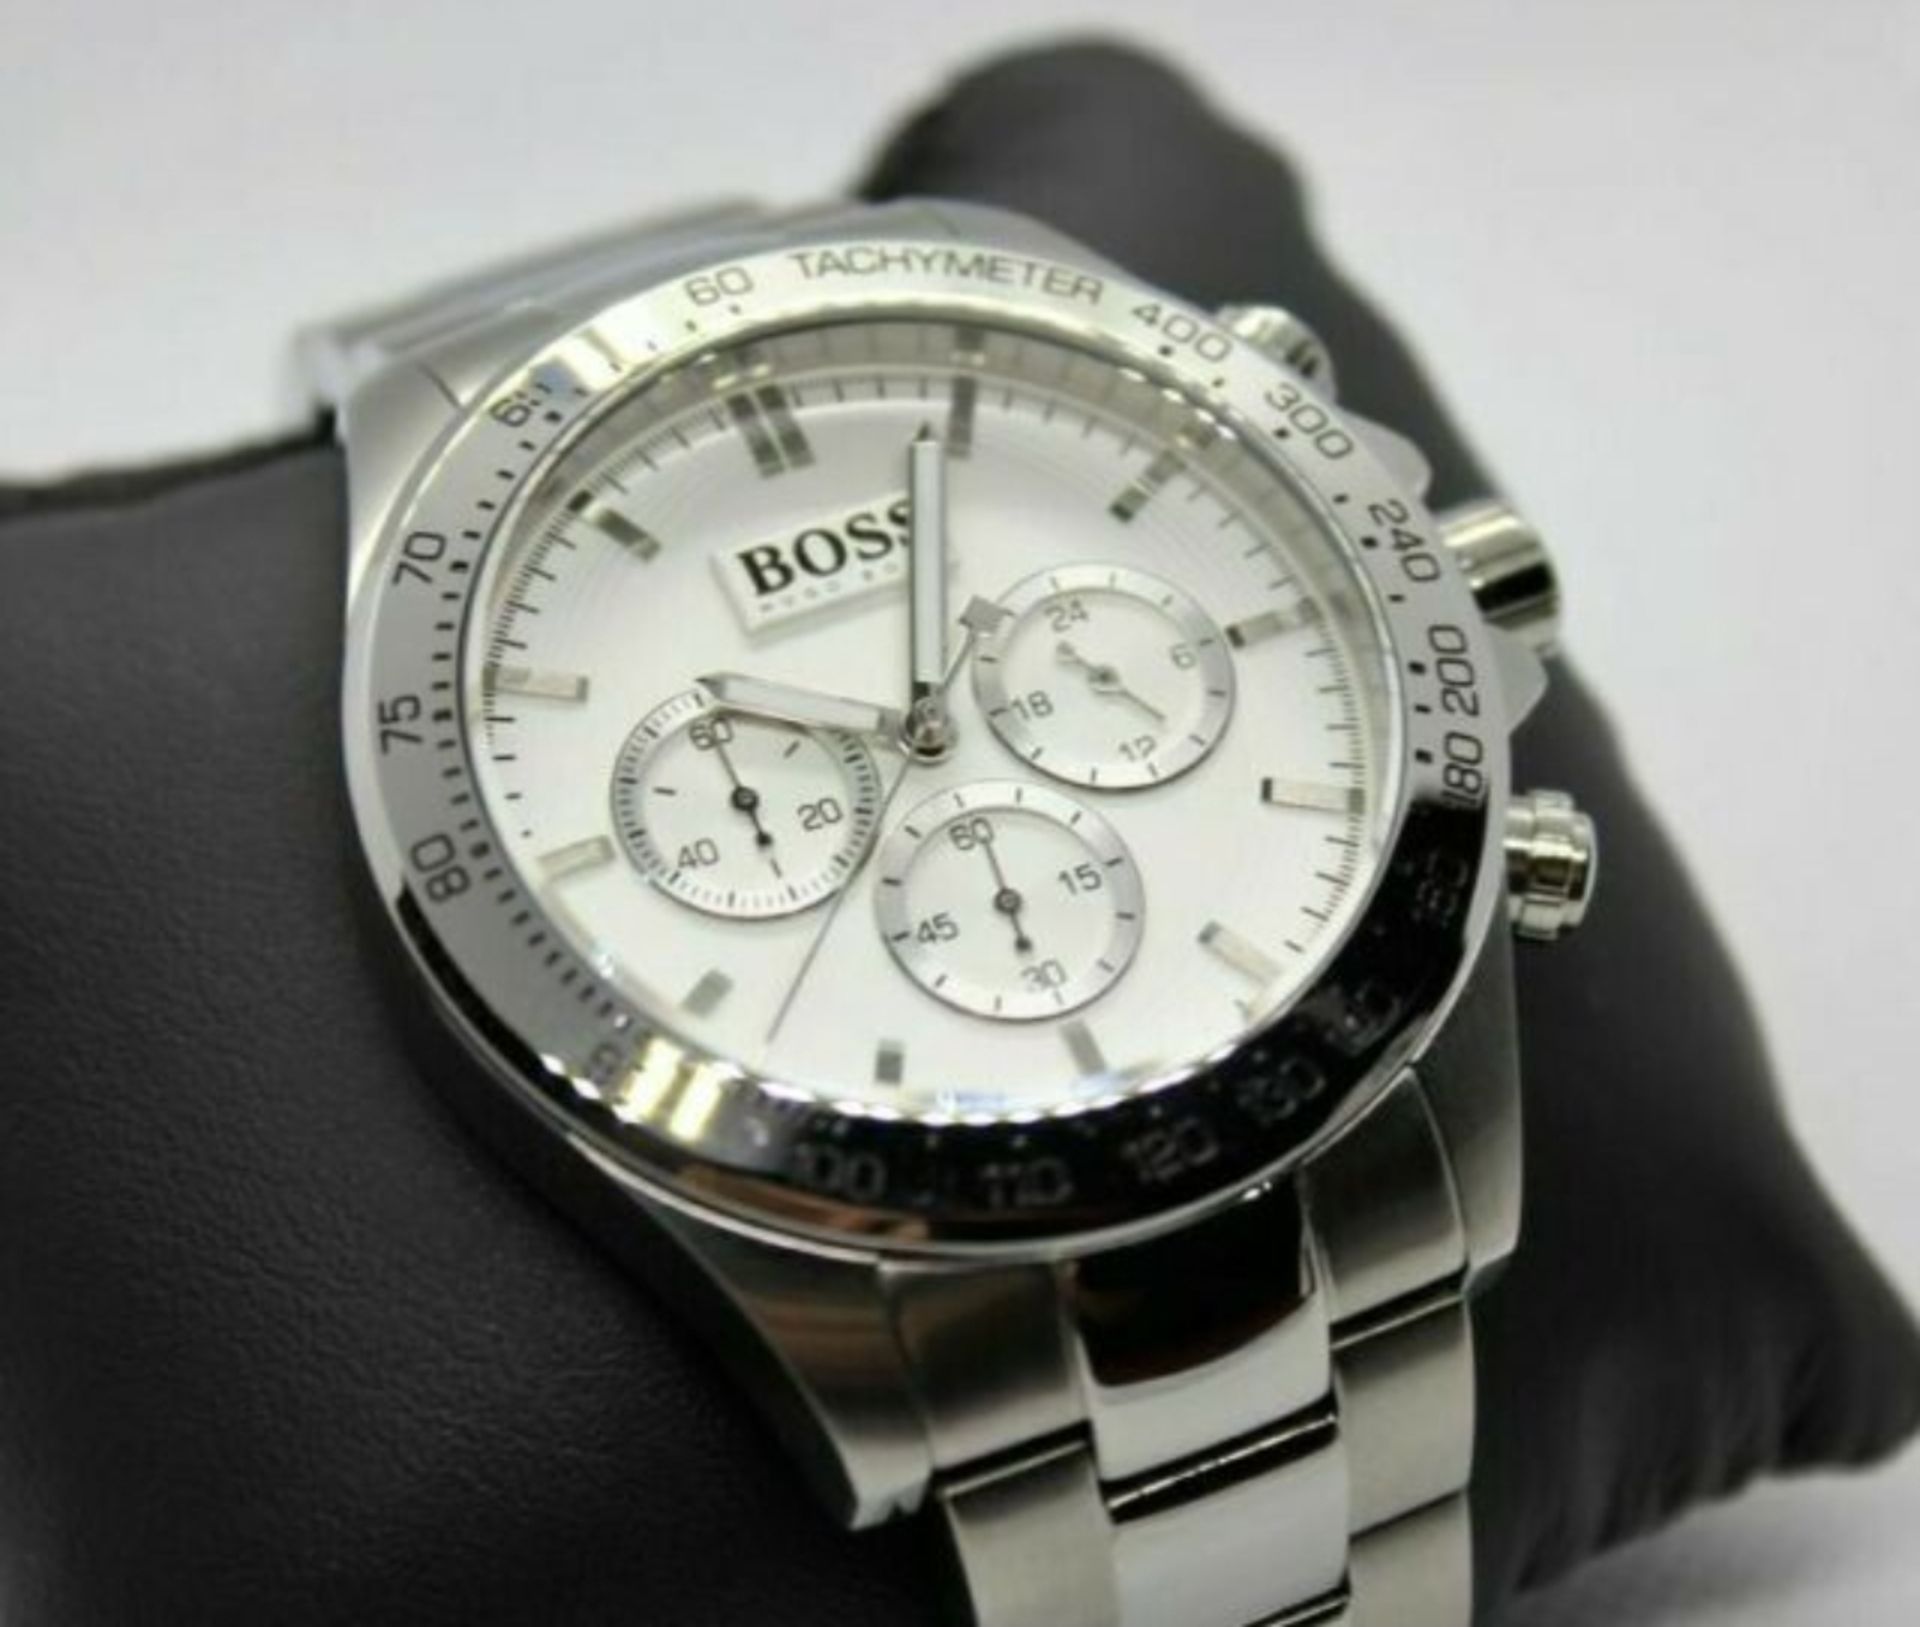 Hugo Boss Men's Ikon Silver Bracelet Chronograph Watch 1512962æ Rugged And Purposeful Whilst - Image 3 of 4